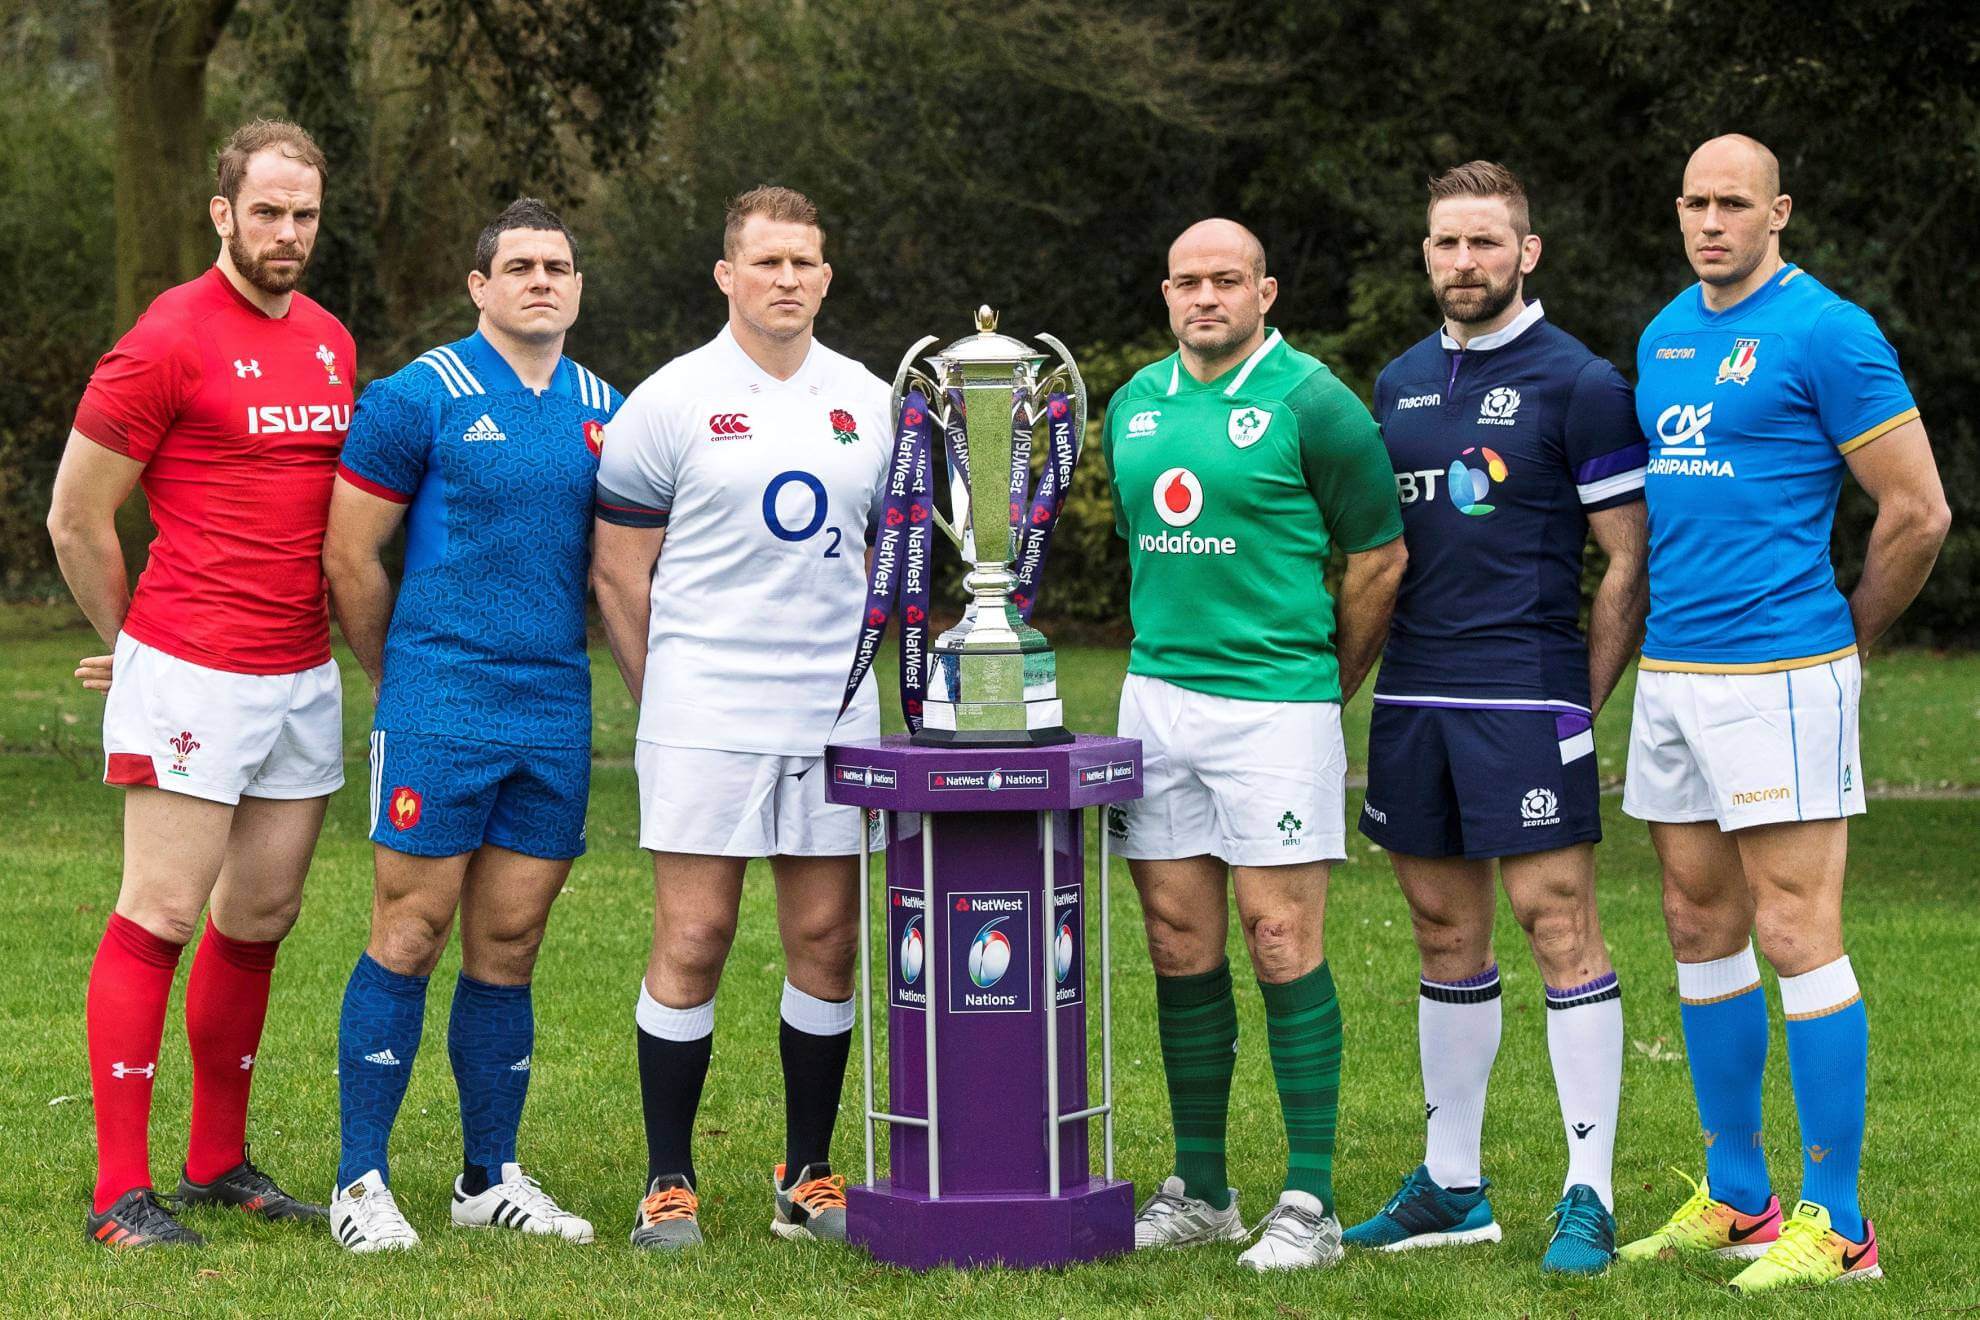 Rugby 6 Nations